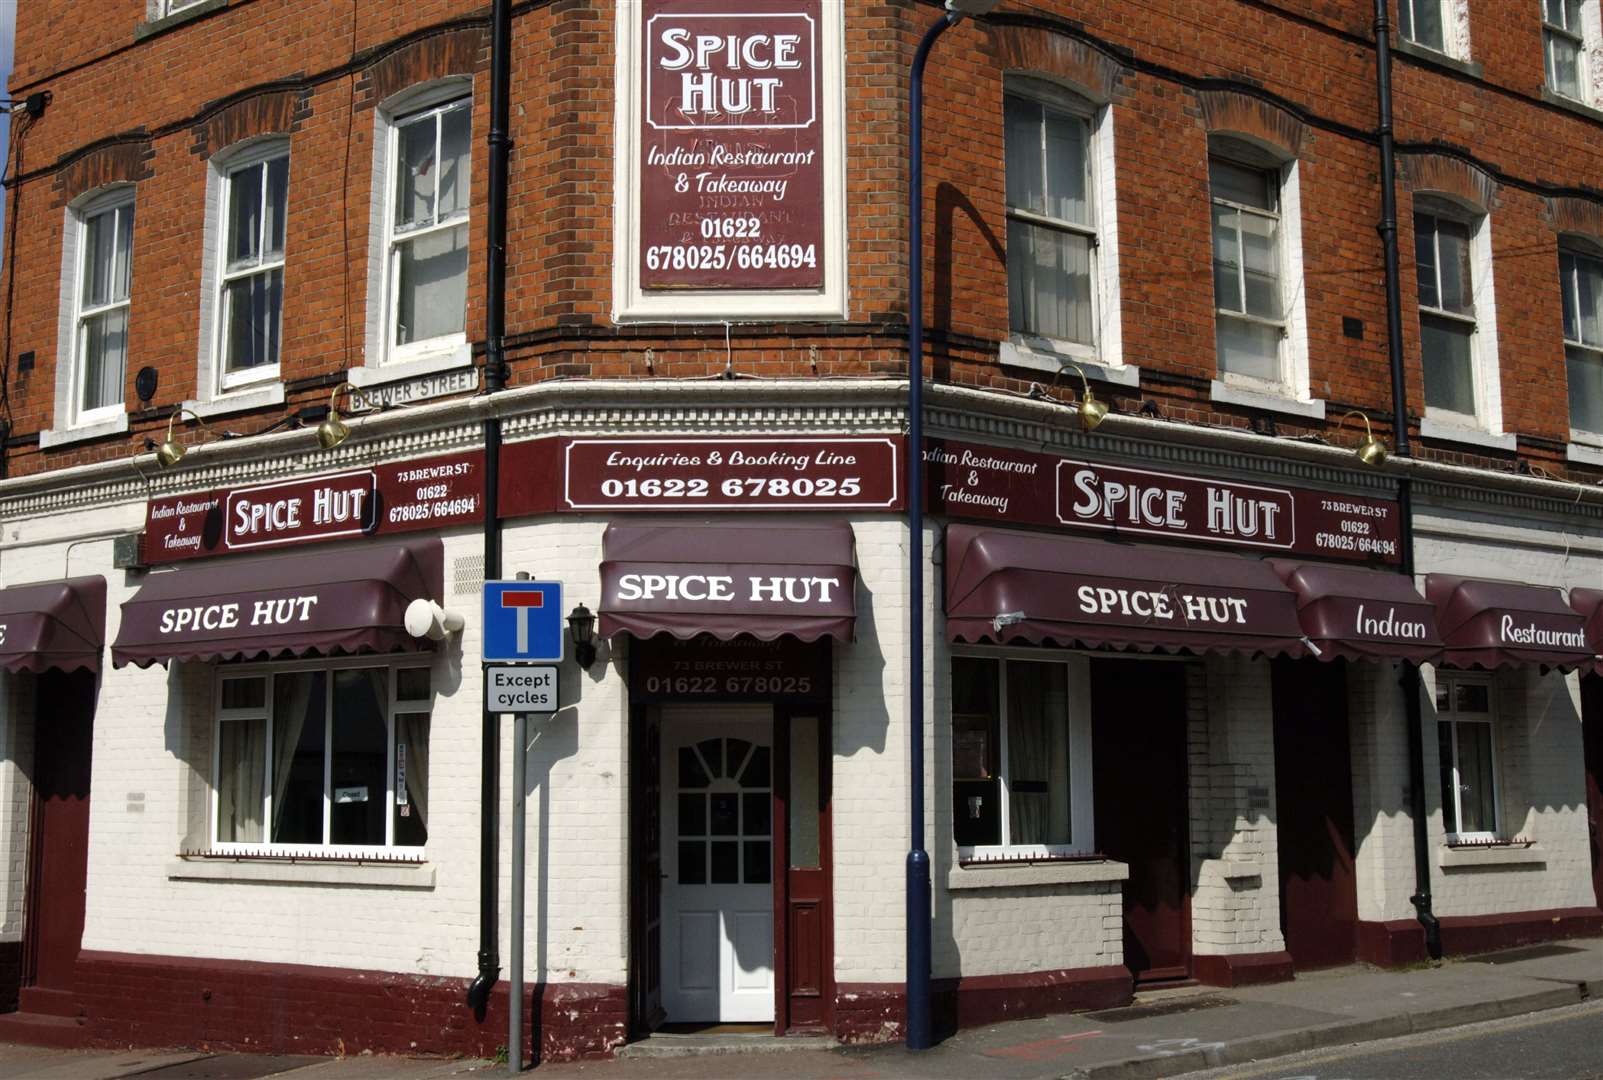 The Spice Hut in Maidstone took part in the scheme. Picture: John Wardley